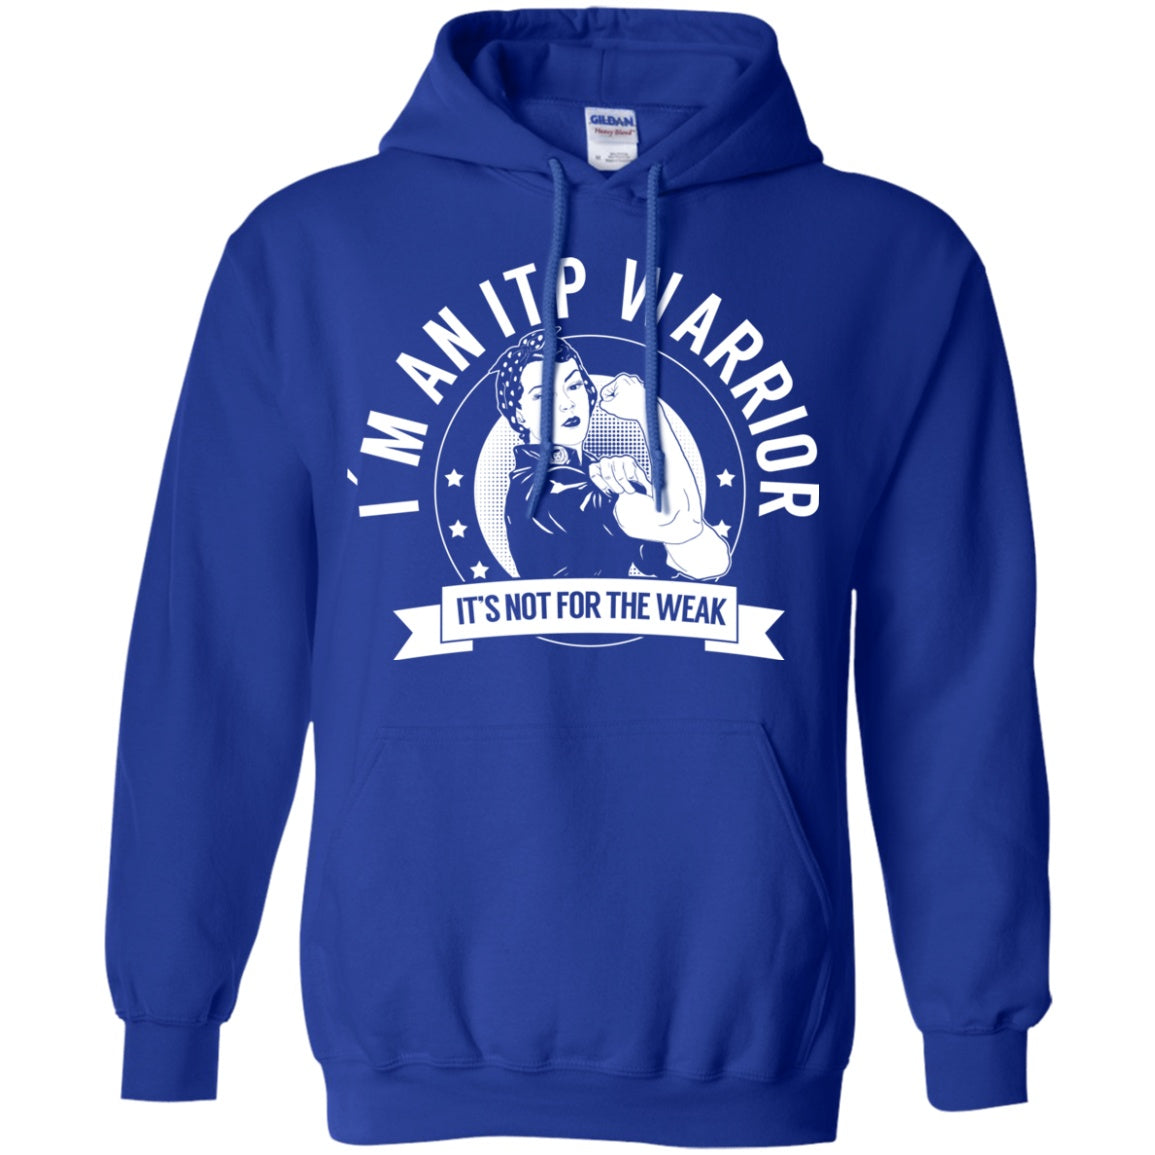 Immune Thrombocytopenic Purpura - ITP Warrior NFTW Pullover Hoodie 8 oz. - The Unchargeables